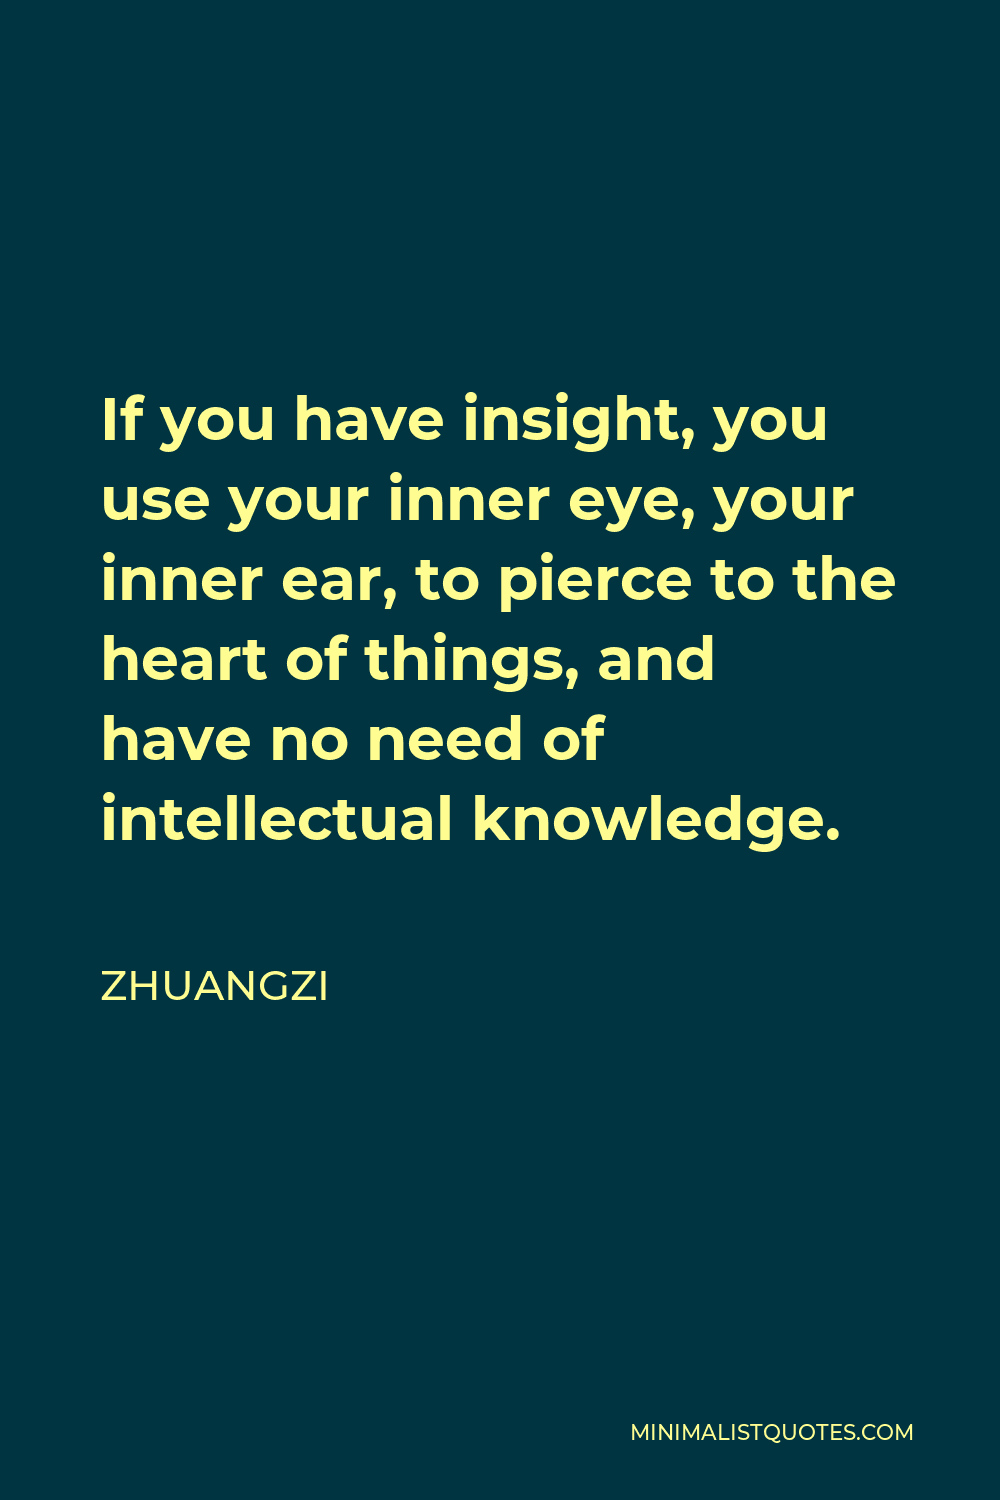 Zhuangzi Quote - If you have insight, you use your inner eye, your inner ear, to pierce to the heart of things, and have no need of intellectual knowledge.